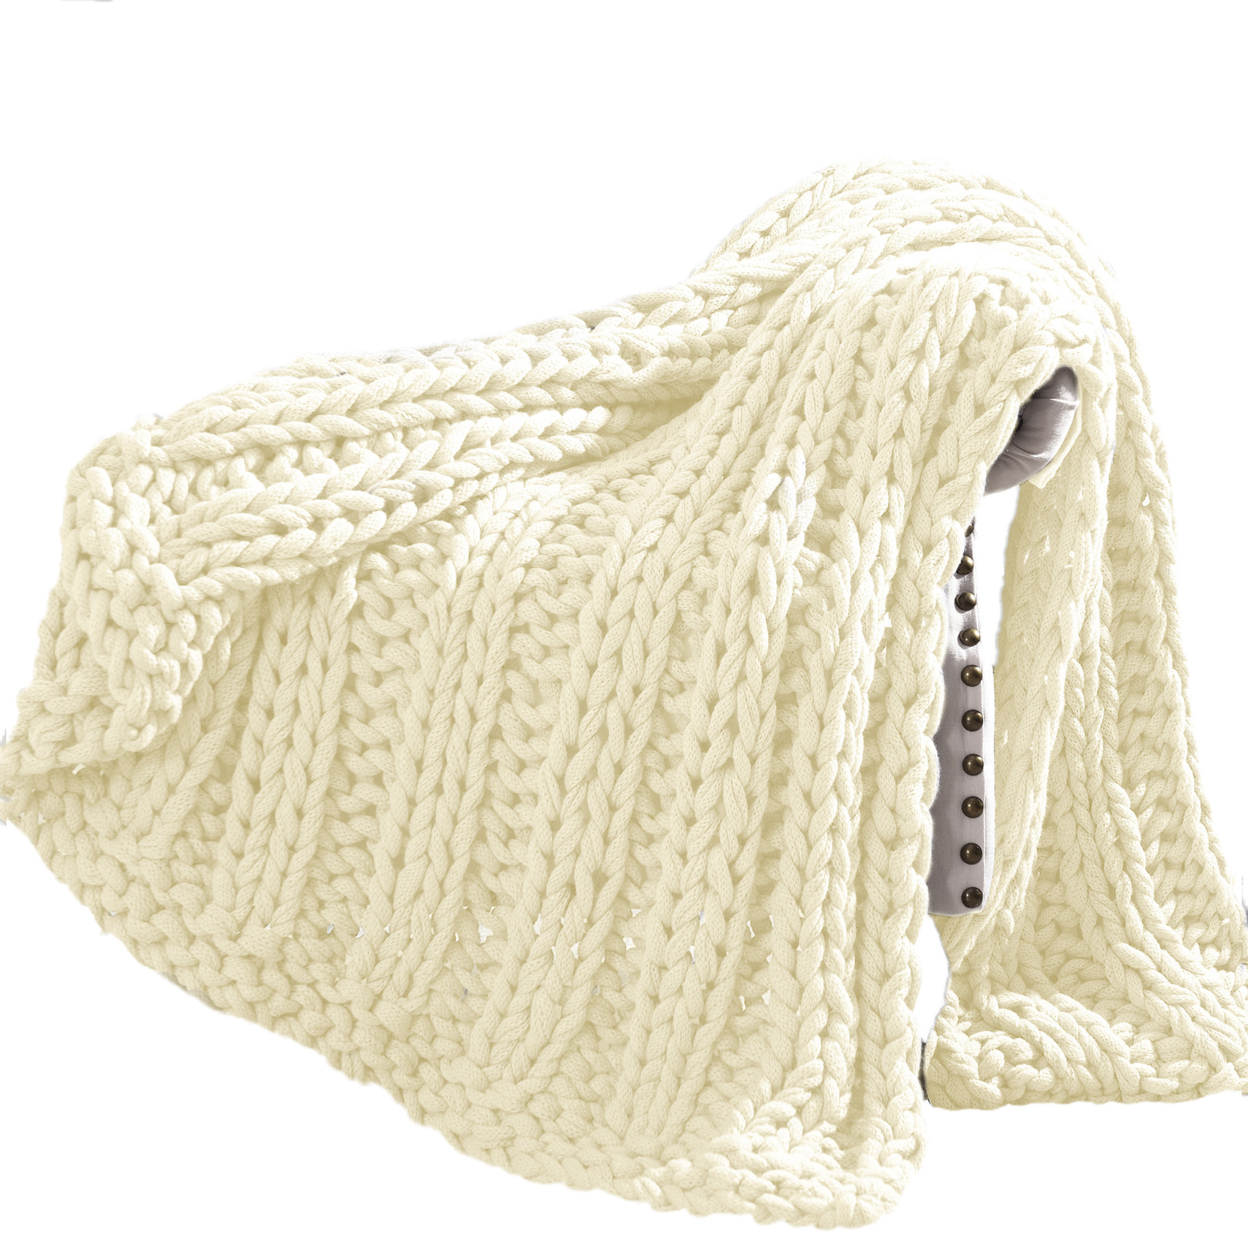 Dreux Acrylic Cable Knitted Chunky Throw The Urban Port, Cream- Saltoro Sherpi